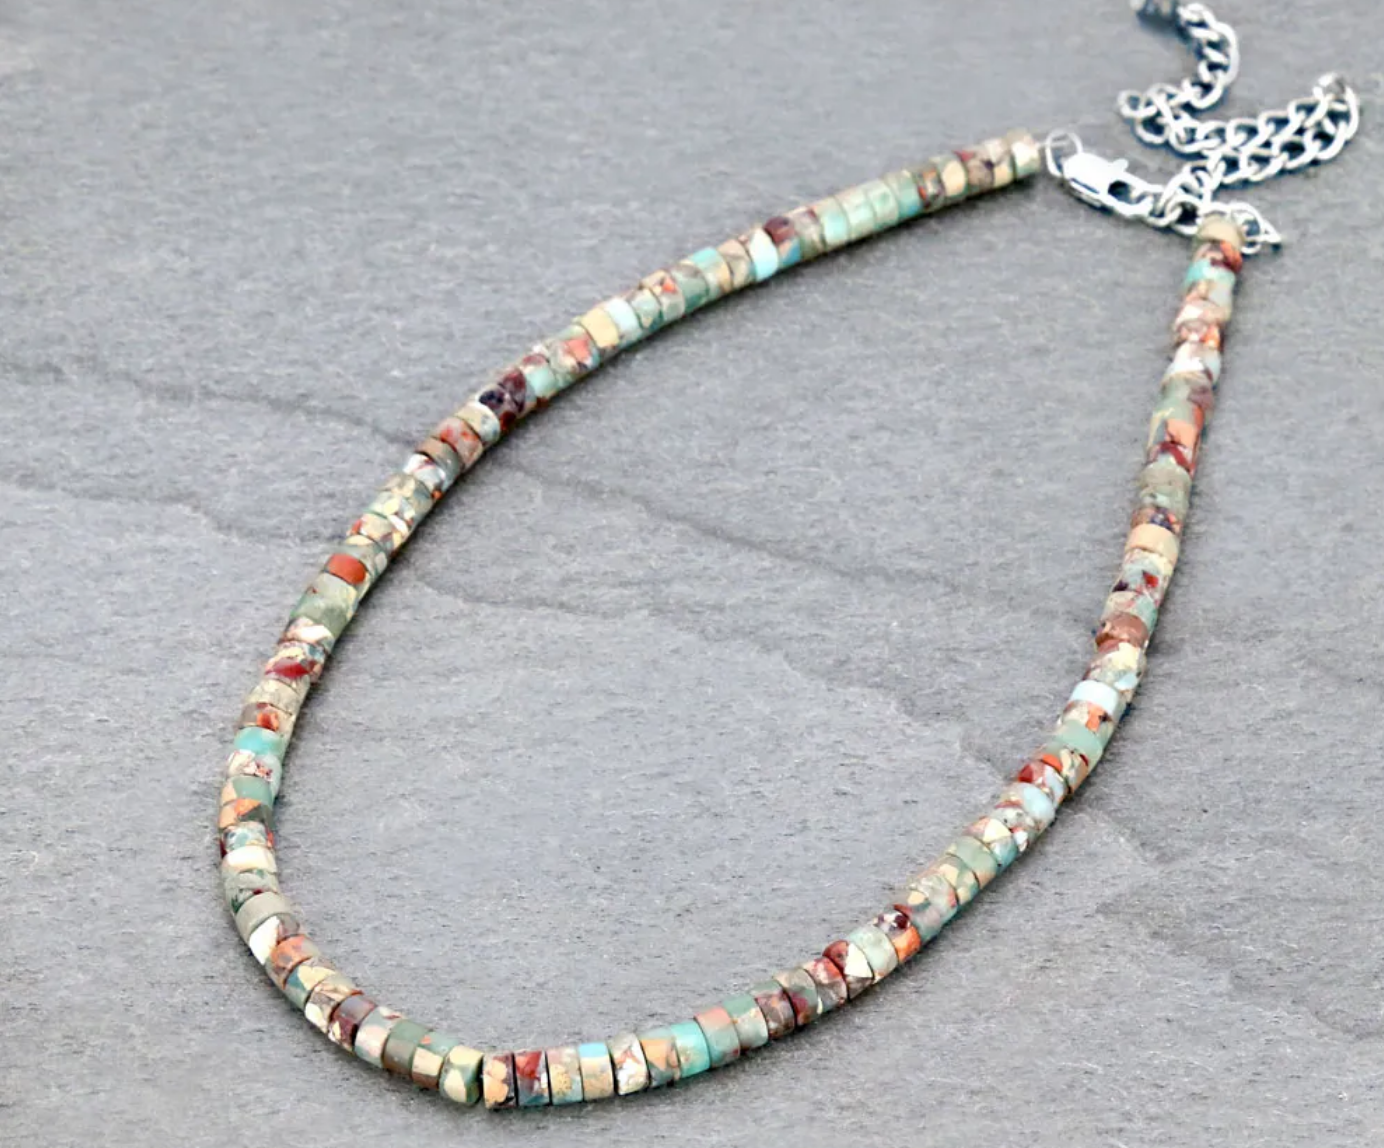 15″ Long, 6mmx4mm Multi Tone Bead Necklace